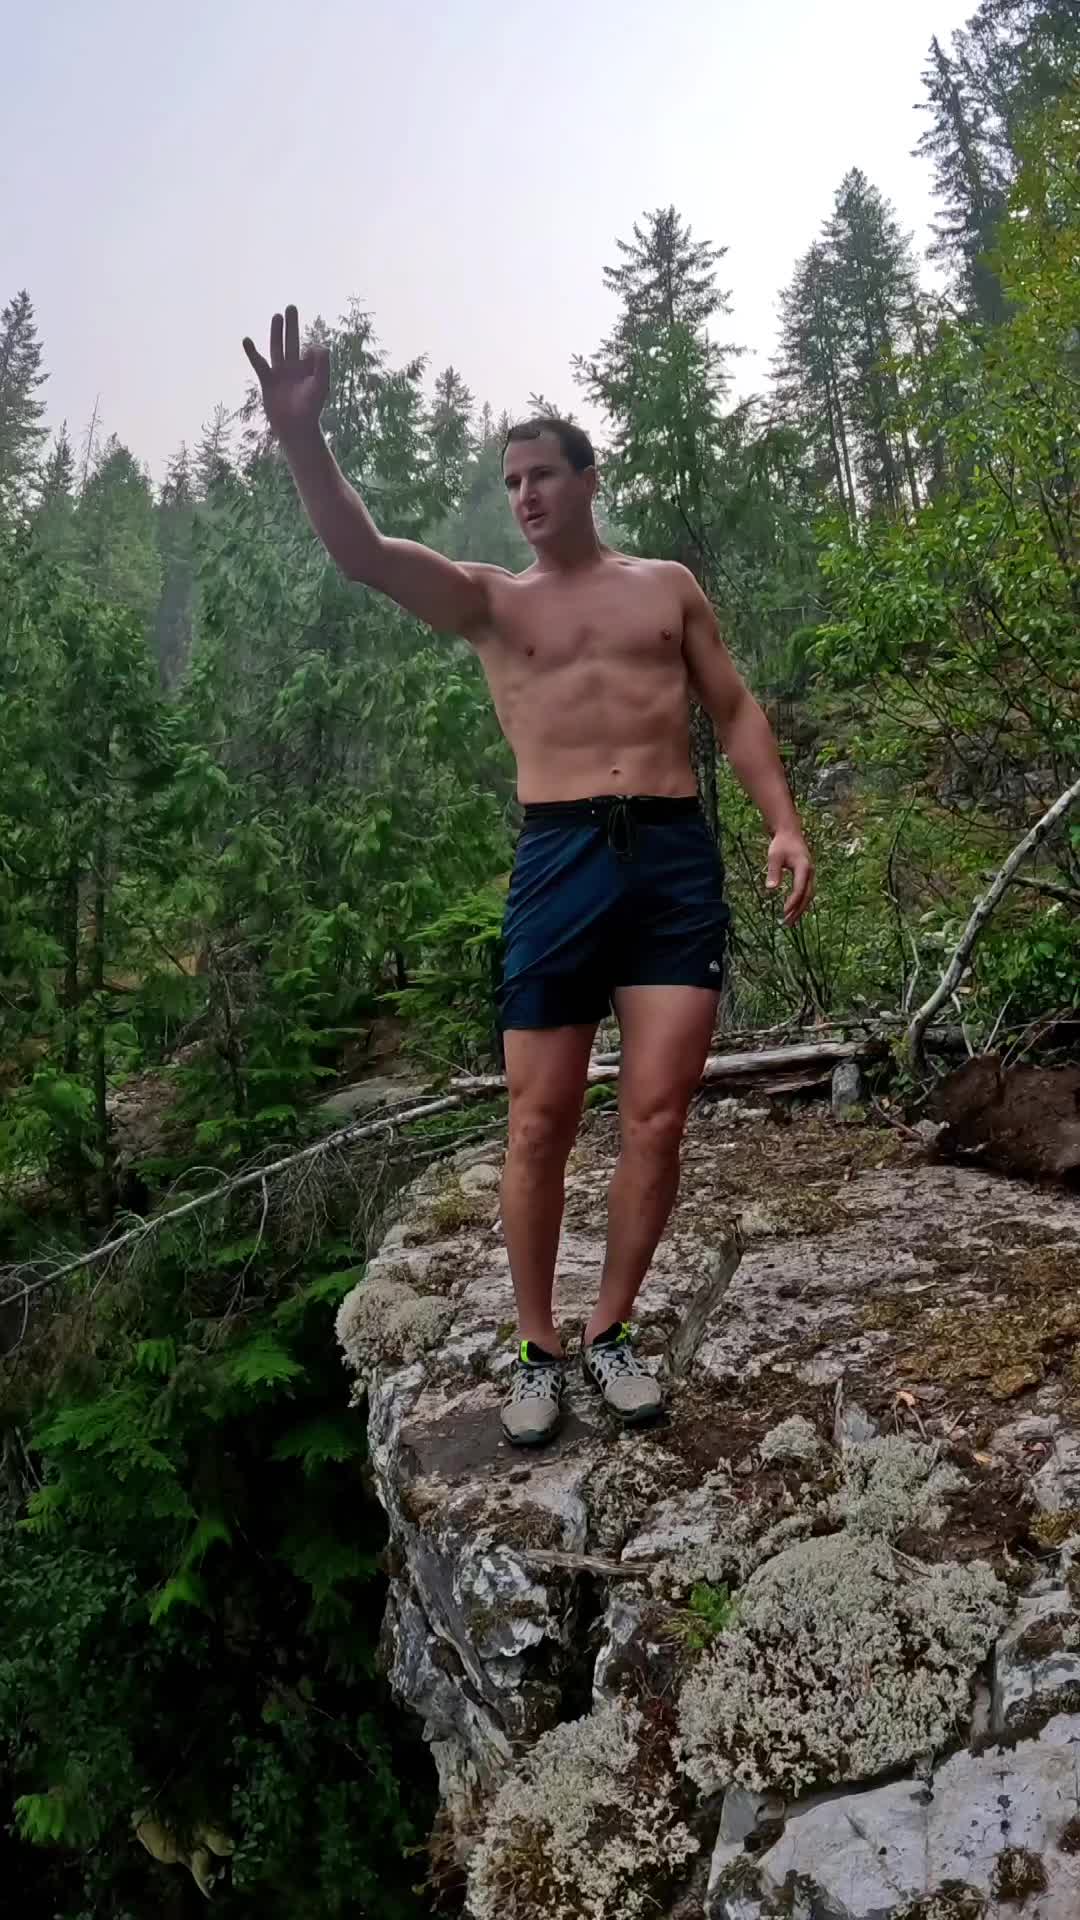 Cliff Jumping Adventure in Revelstoke, BC